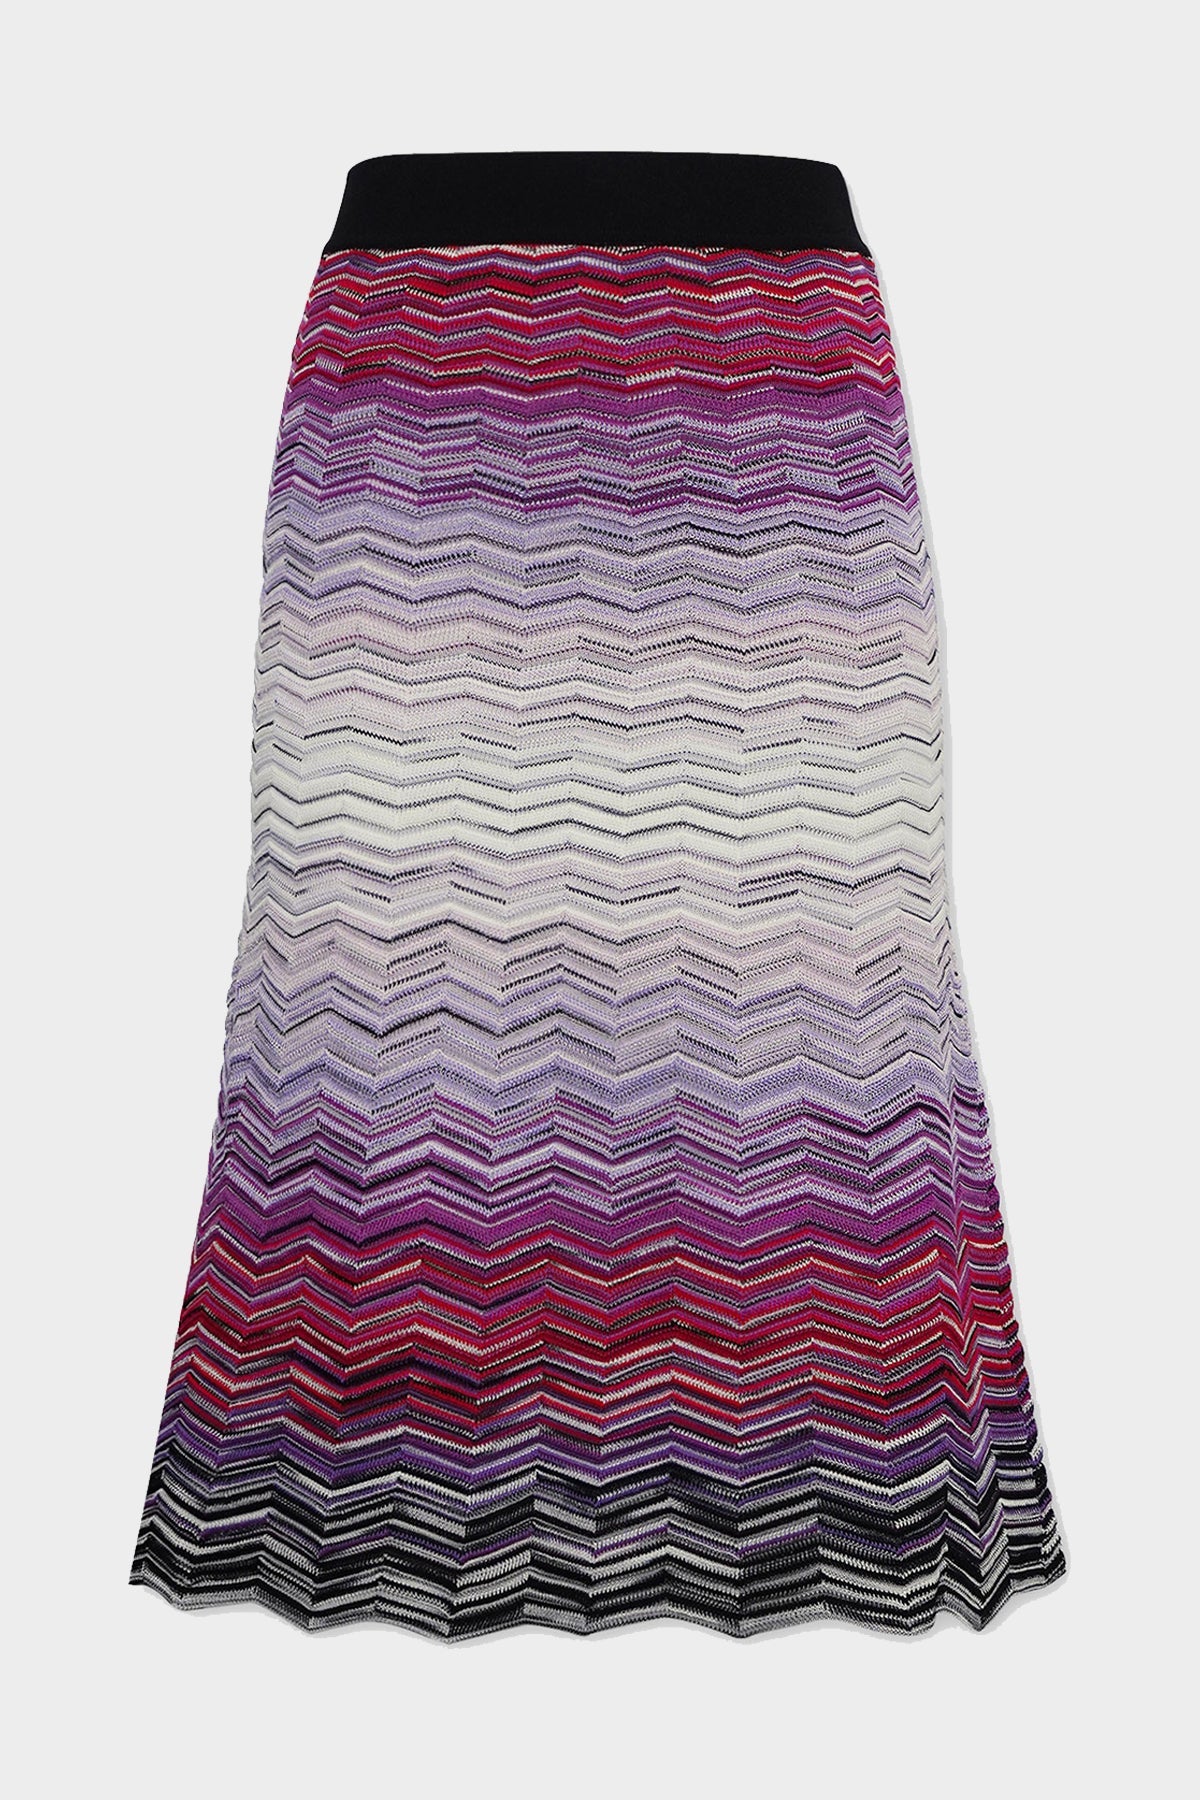 Zig-Zag Knitted Skirt in Red Black and Blue - shop-olivia.com